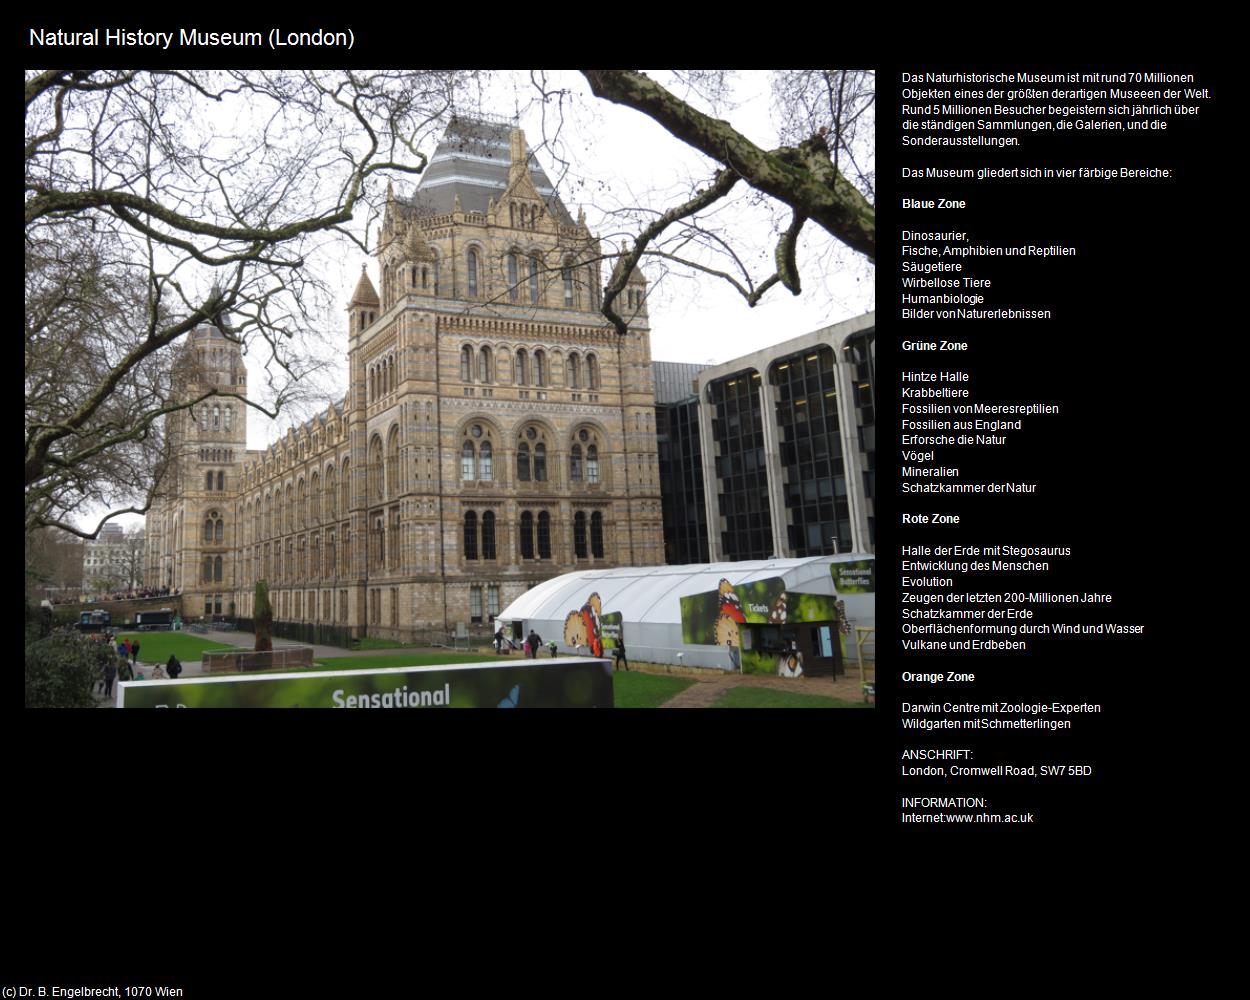 Natural History Museum (London, England) in Kulturatlas-ENGLAND und WALES